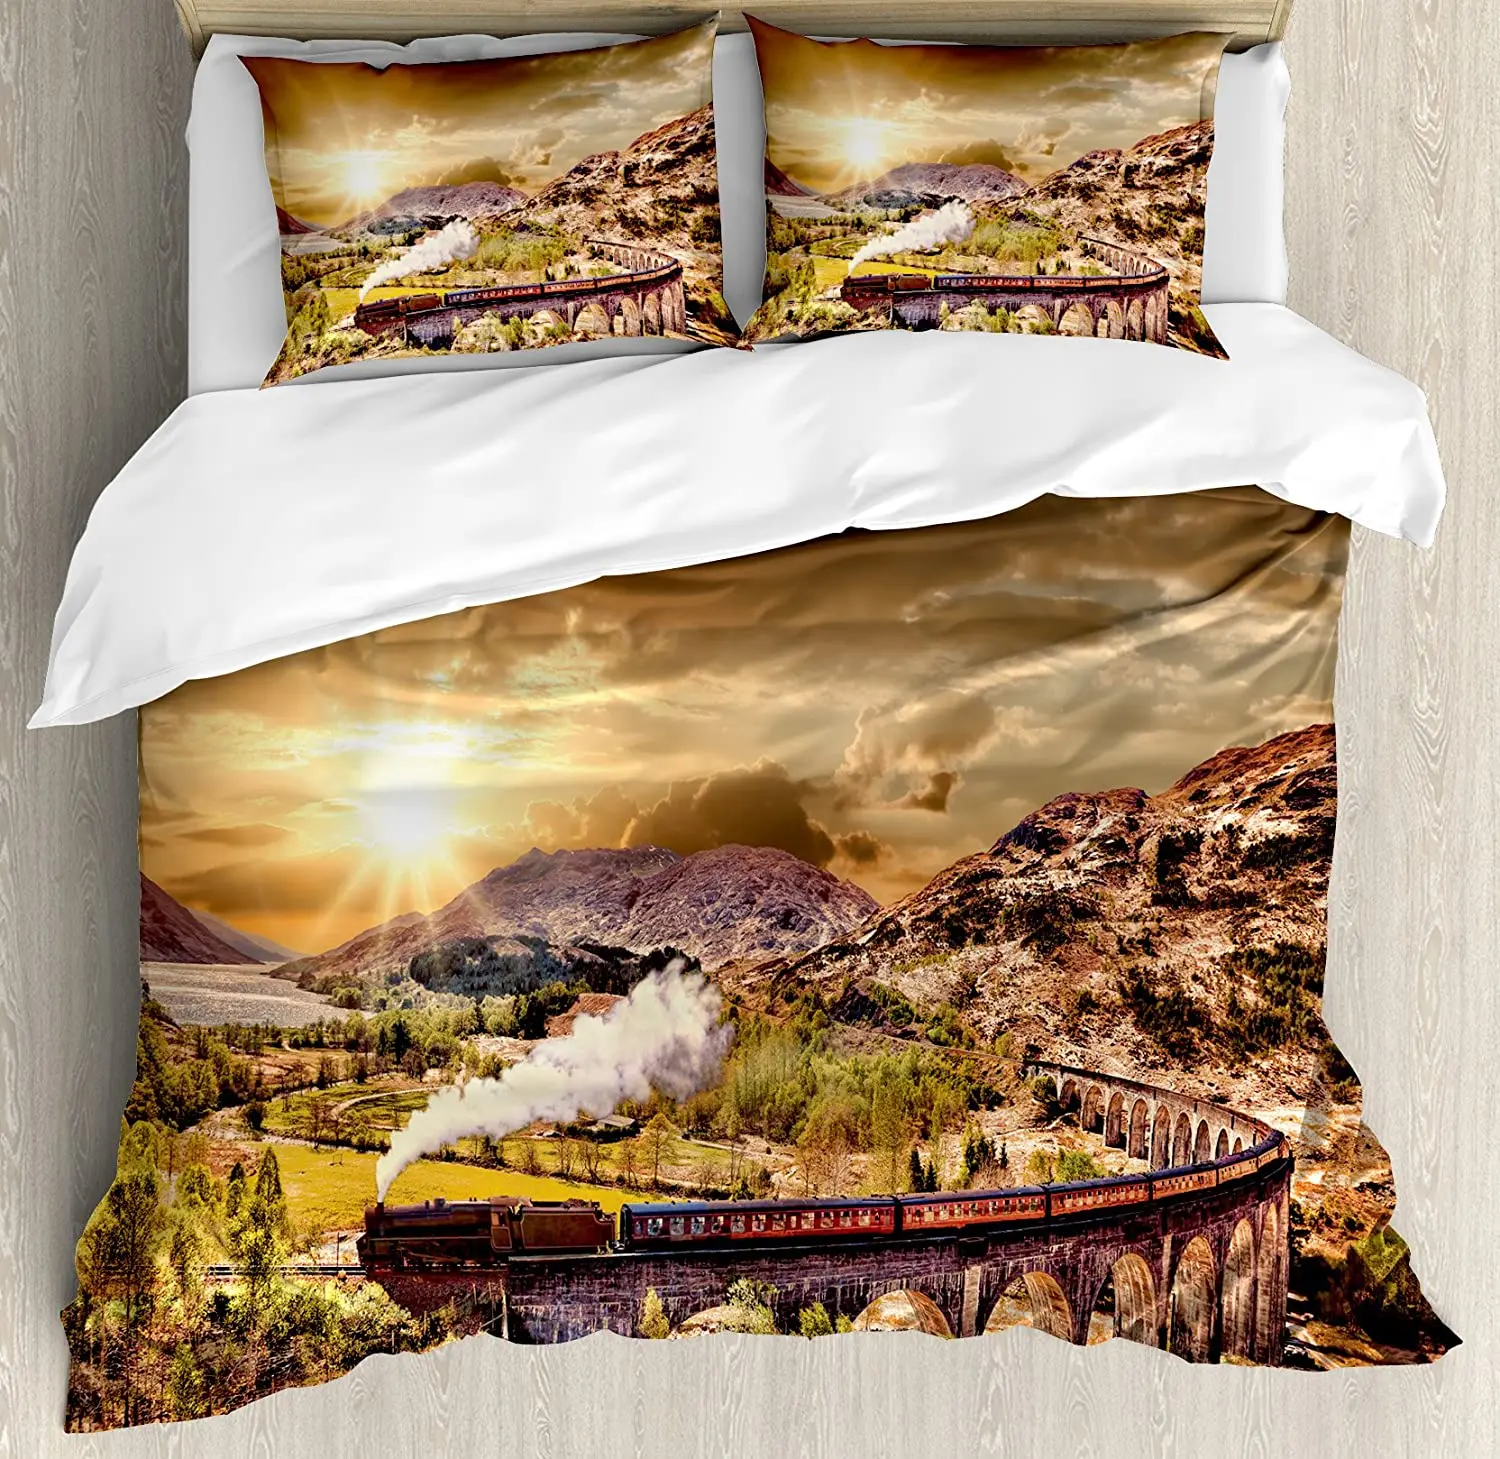 

Wizard Bedding Set For Bedroom Bed Home Wizard School Express Famous Train Landscape Glenf Duvet Cover Quilt Cover Pillowcase